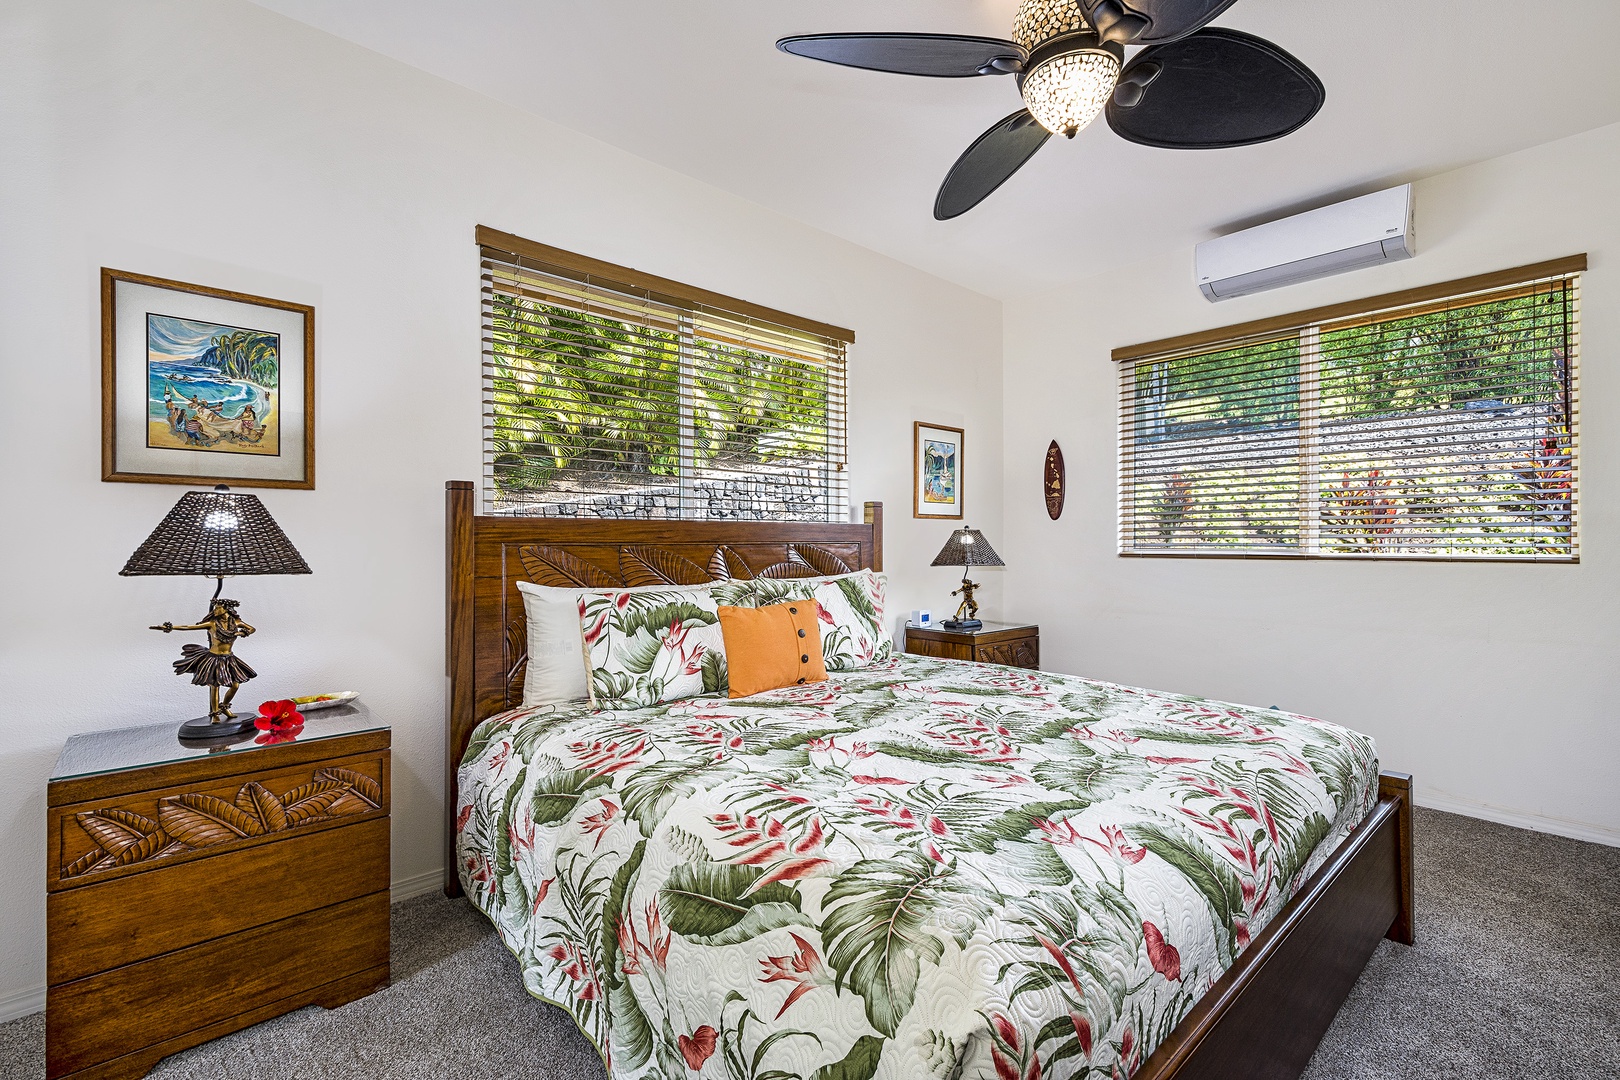 Kailua Kona Vacation Rentals, Maile Hale - Guest bedroom with king bed, TV and A/C